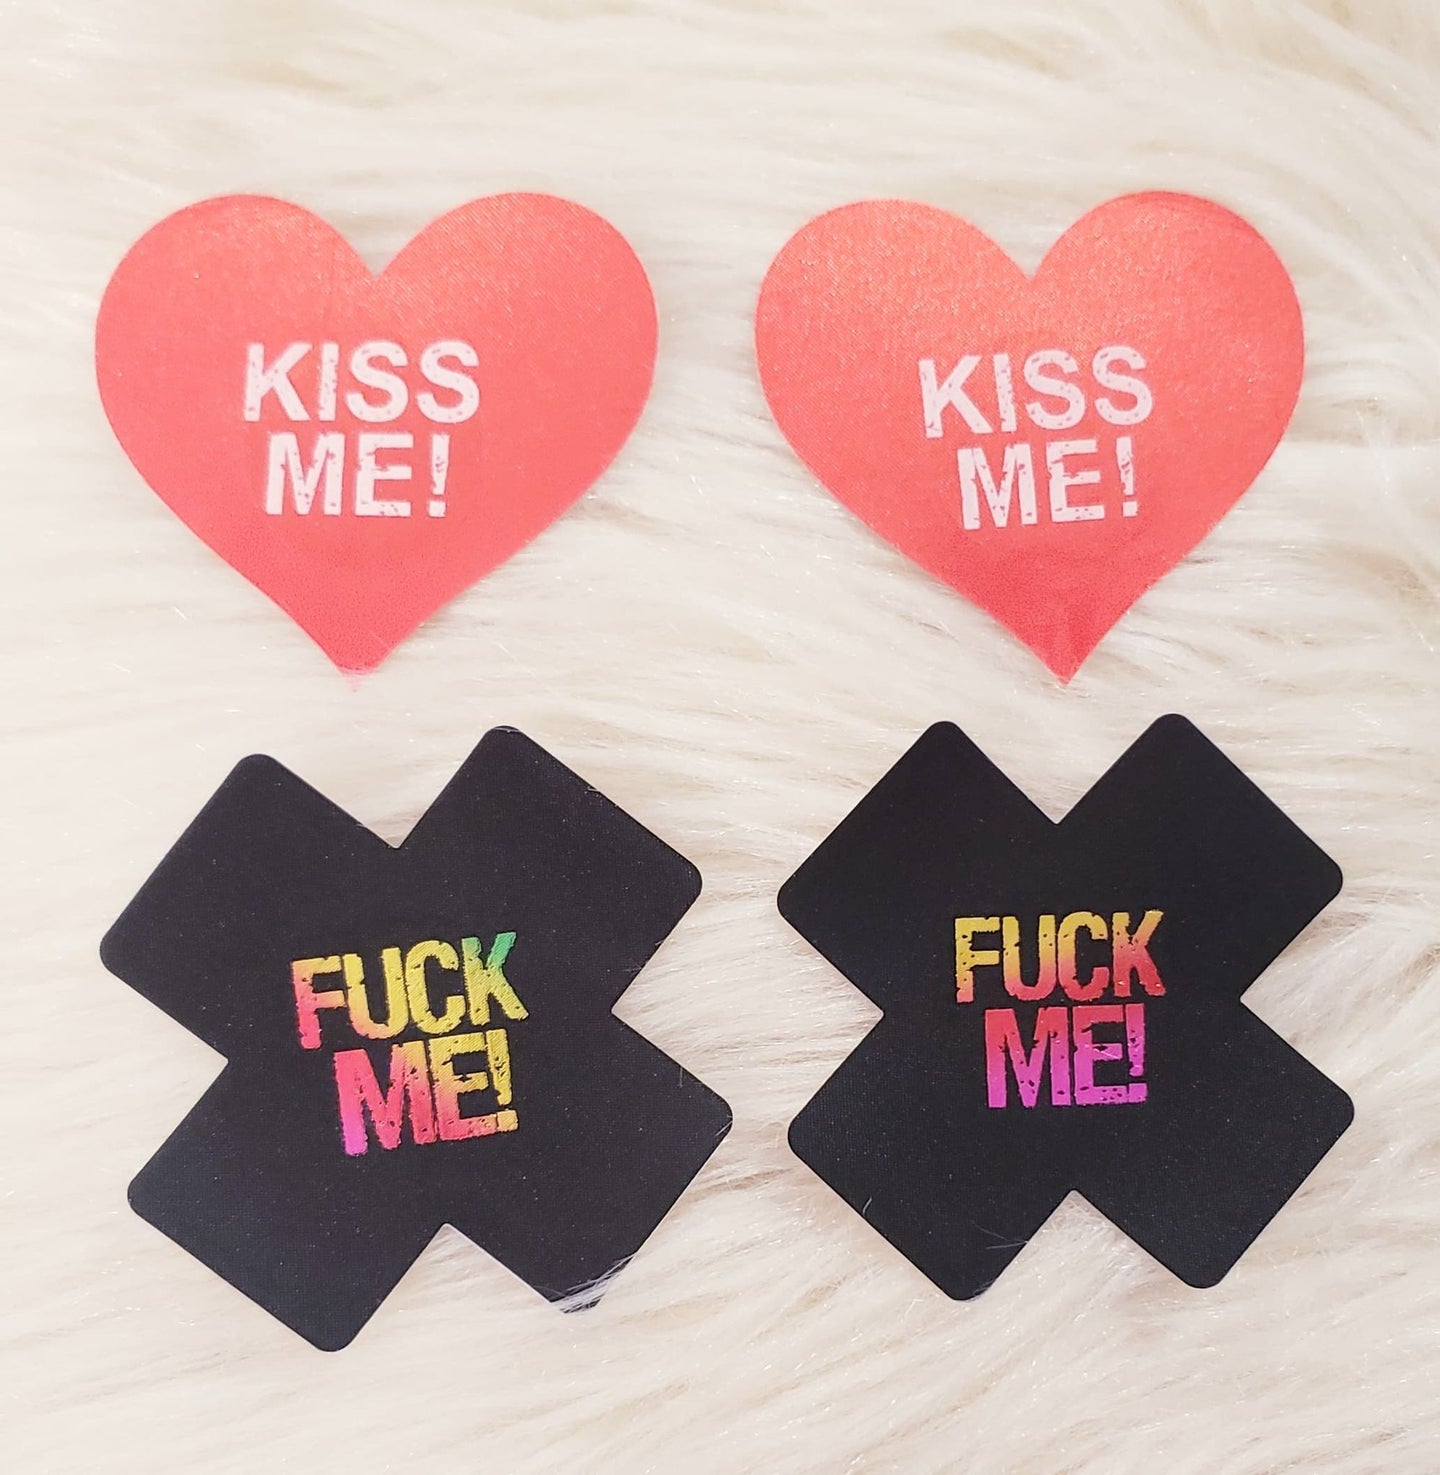 2 Pairs Heart Kiss Me & F*ck Me Pasties - Nipple Covers, Stickers, Lifestyle, Rally, Rave, Costume, Lingerie